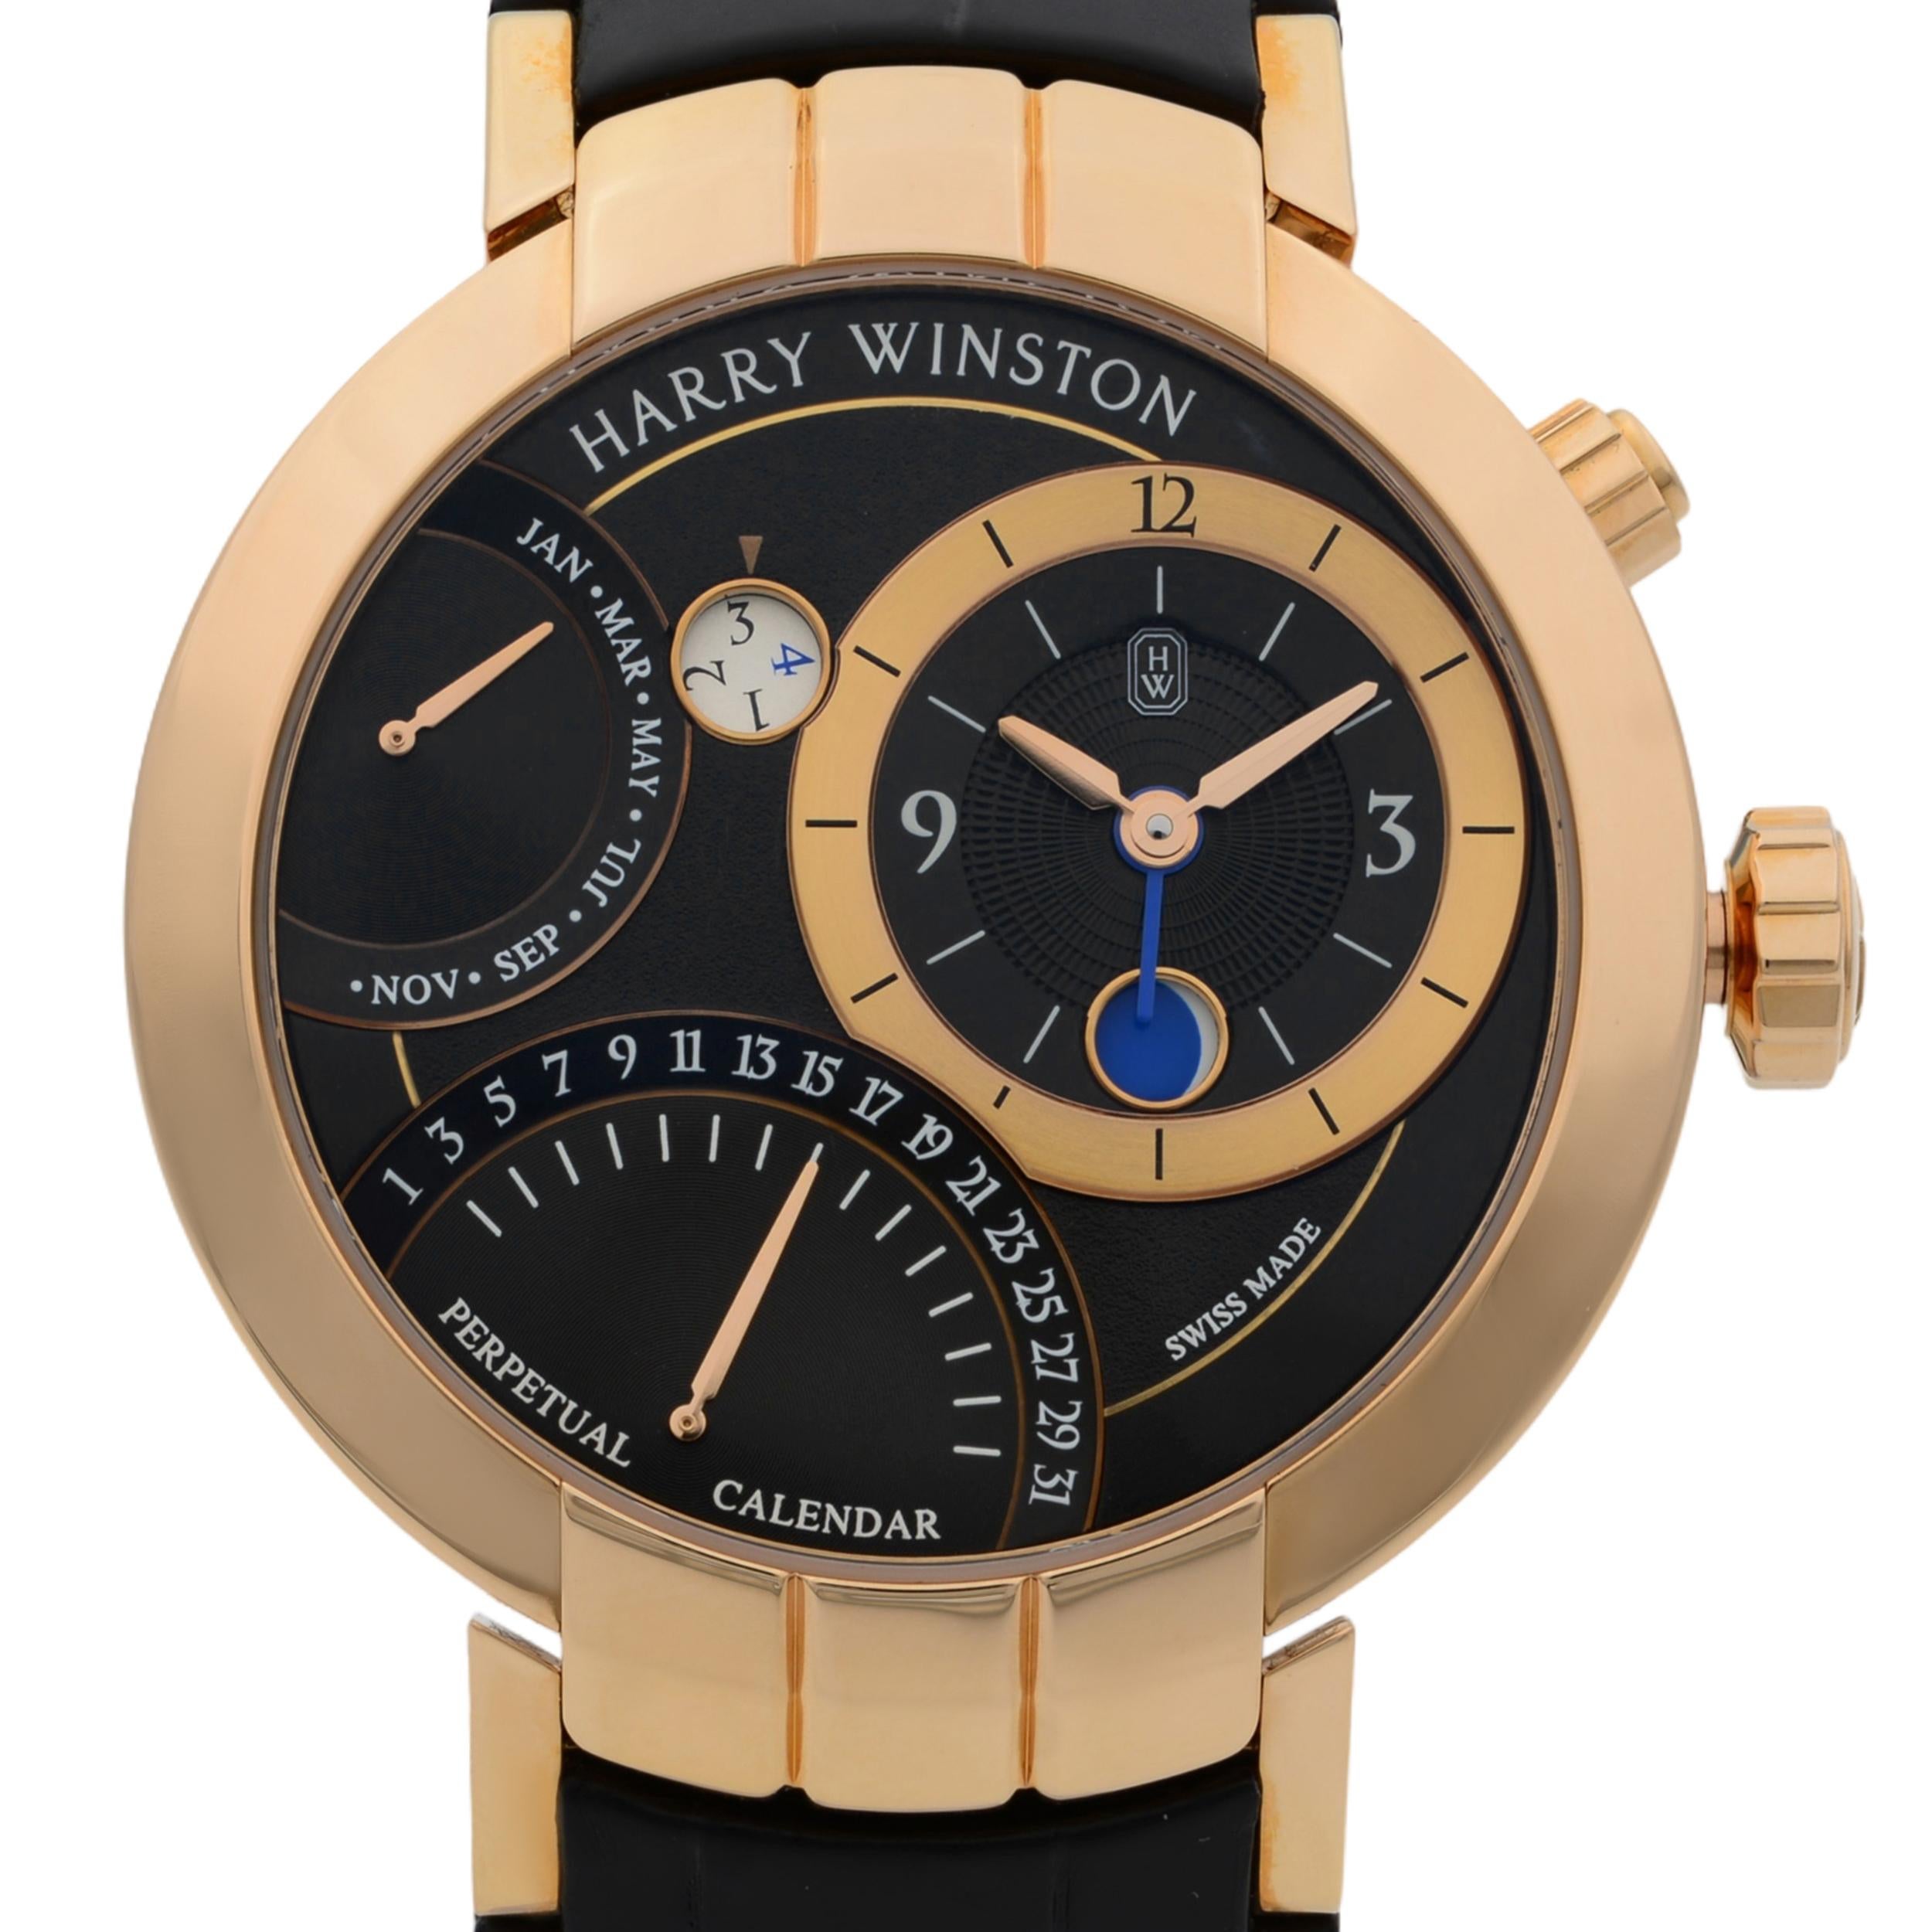 This  never been worn  Harry Winston Premier PRNAPC41RR001 is a beautiful men's timepiece that is powered by mechanical (automatic) movement which is cased in a rose gold case. It has a round shape face, gmt, day & date, moon phase, small seconds